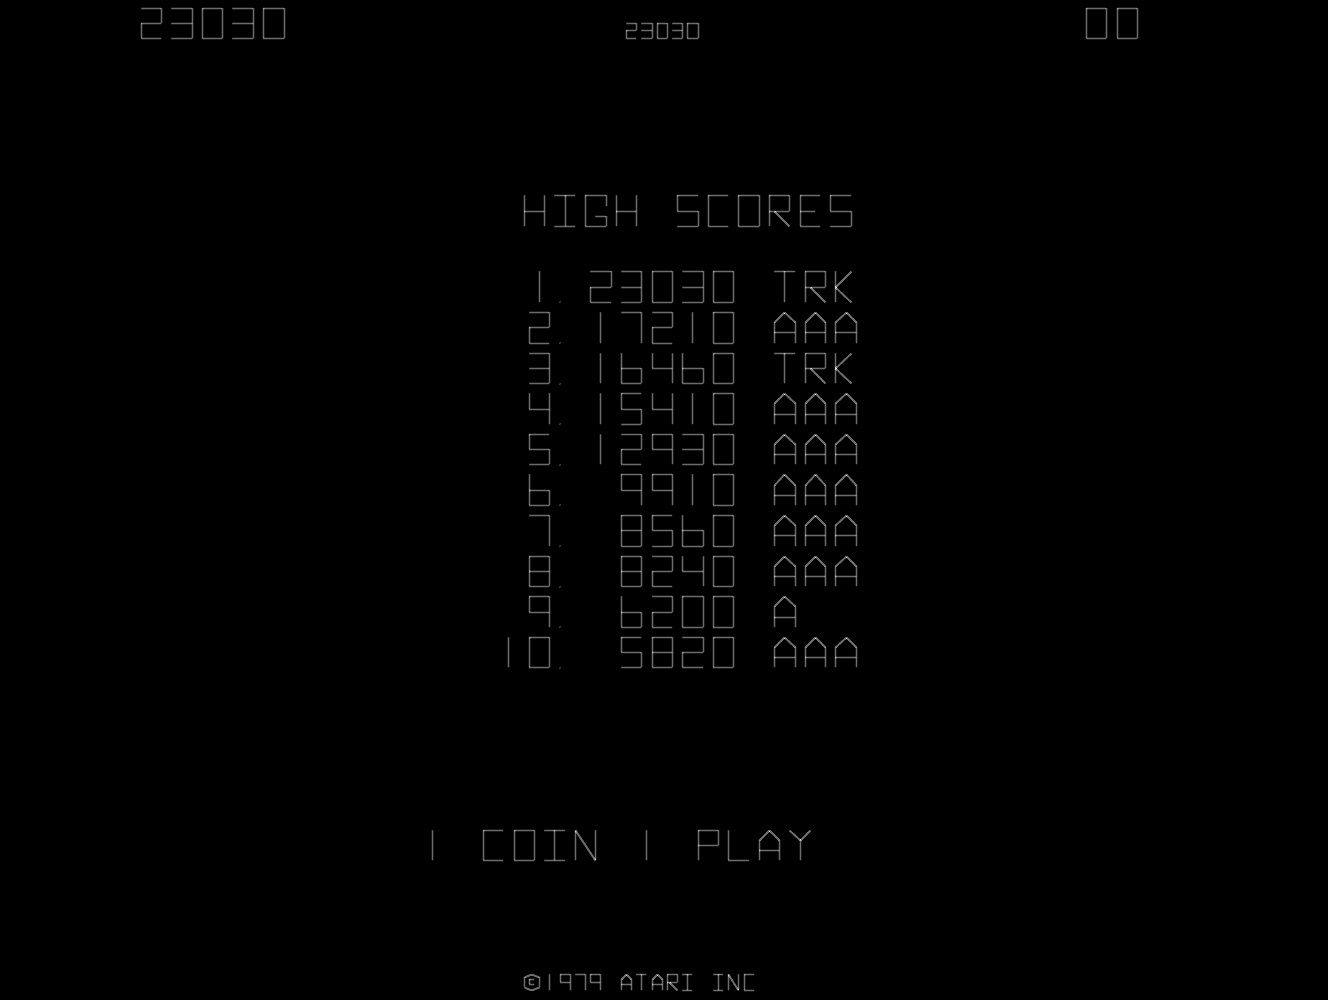 TheTrickster: Asteroids (Arcade Emulated / M.A.M.E.) 23,030 points on 2016-06-28 21:53:30